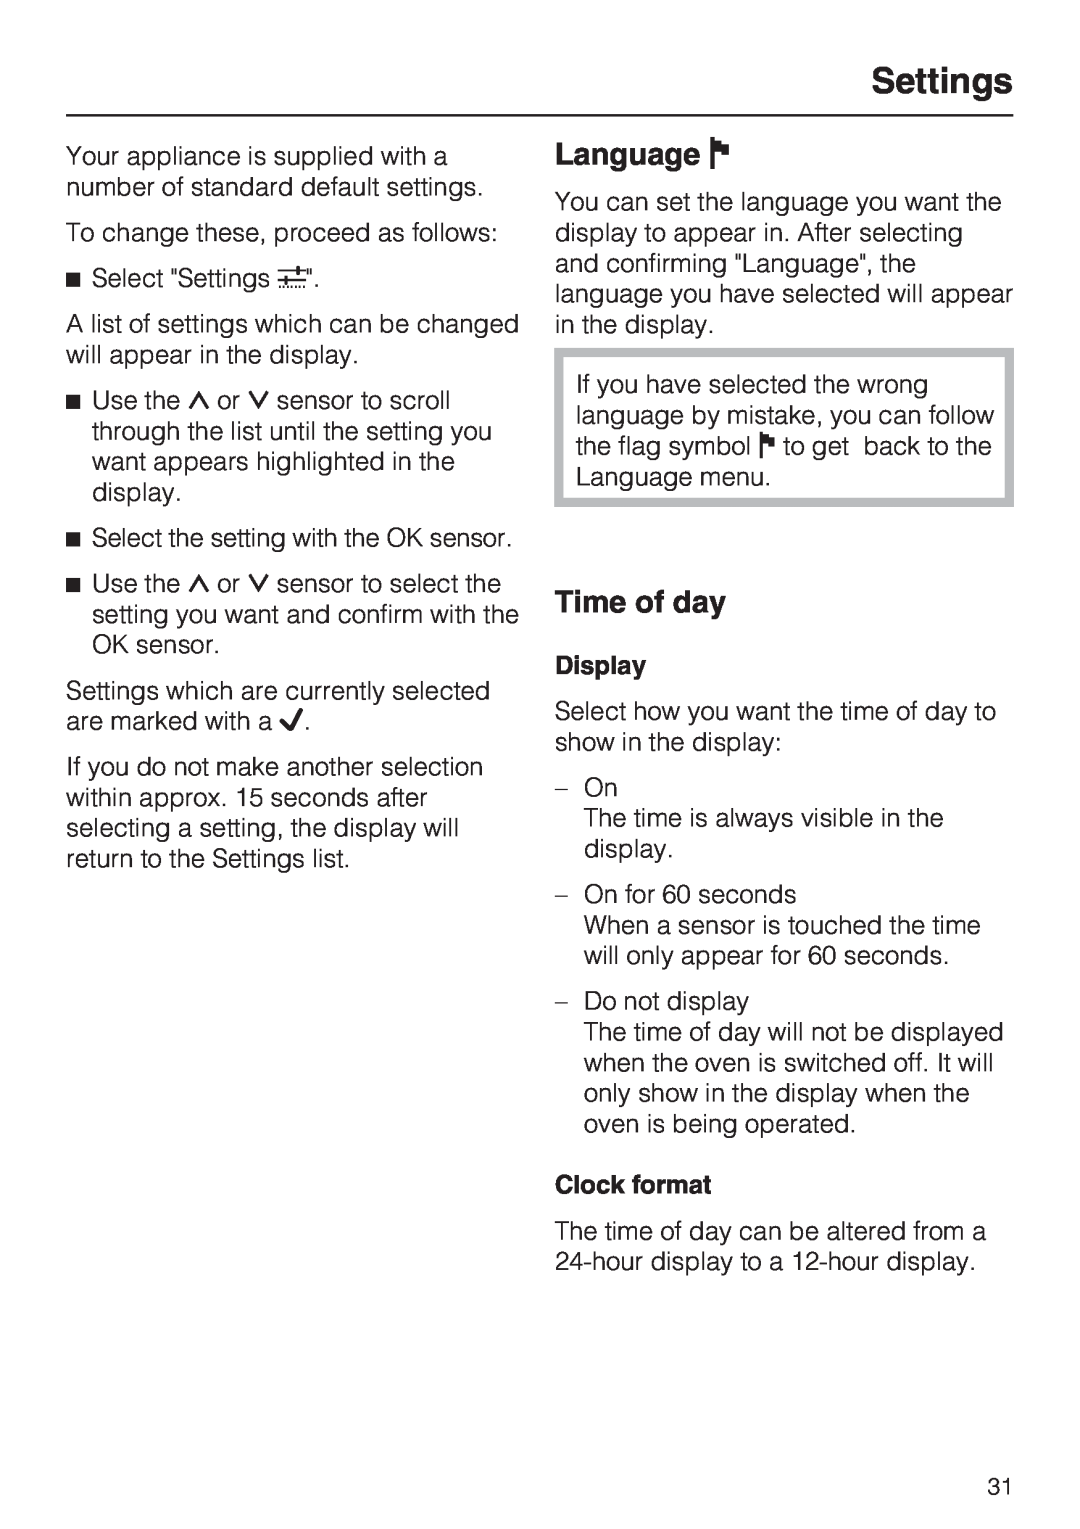 Miele H 5460-BP installation instructions Settings, Language J, Time of day, Display, Clock format 